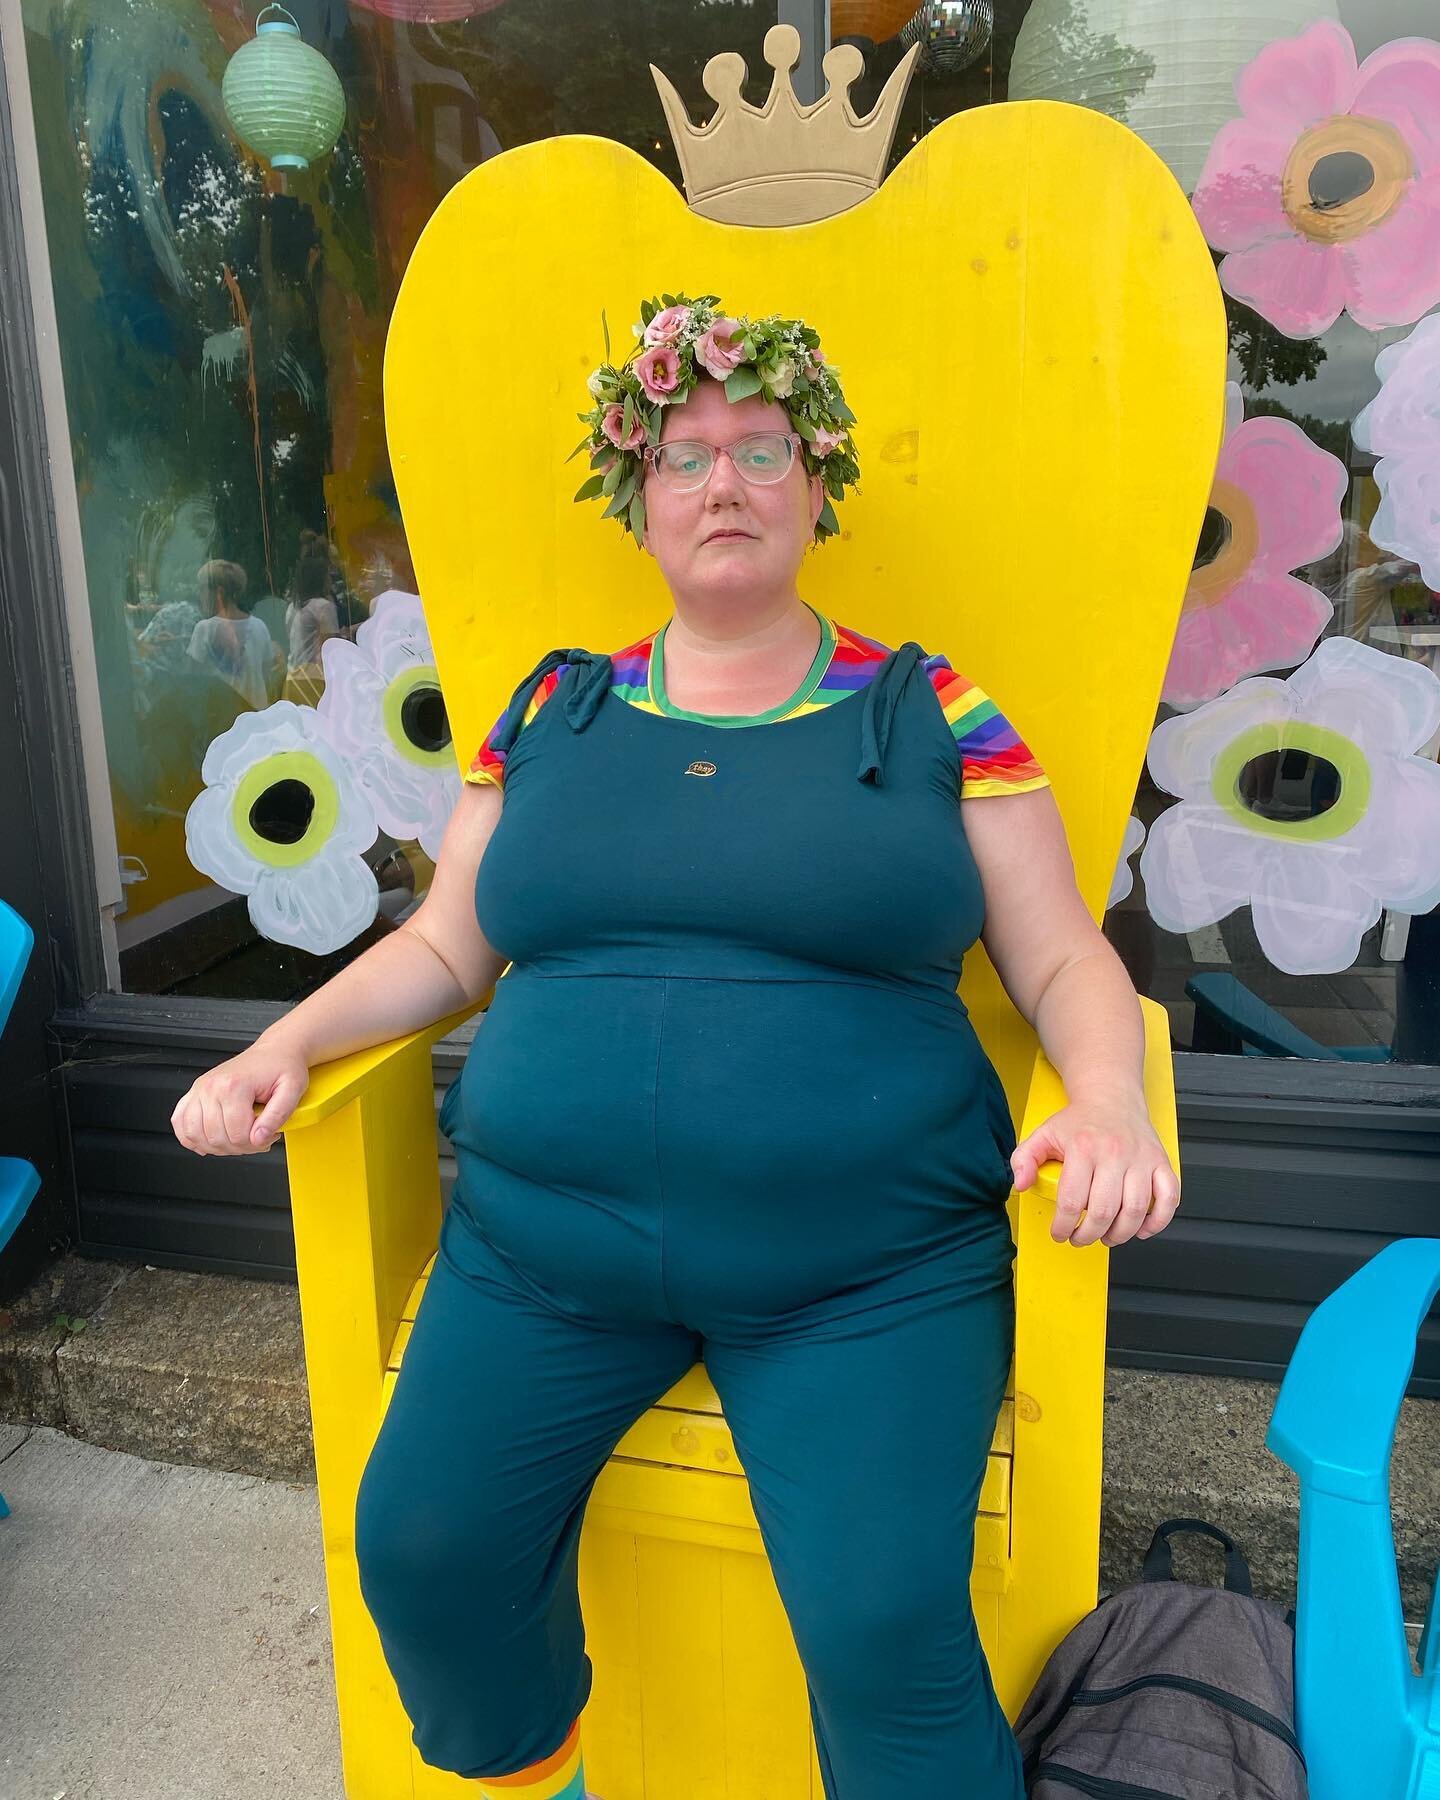 In a happy coincidence I went to my first queer pride March just before Nonbinary Awareness Week and got this awesome pic taken in all my fat enby glory!

As a friend said, Quing Enby at your service! Yes, I made the flower crown!

If you didn&rsquo;